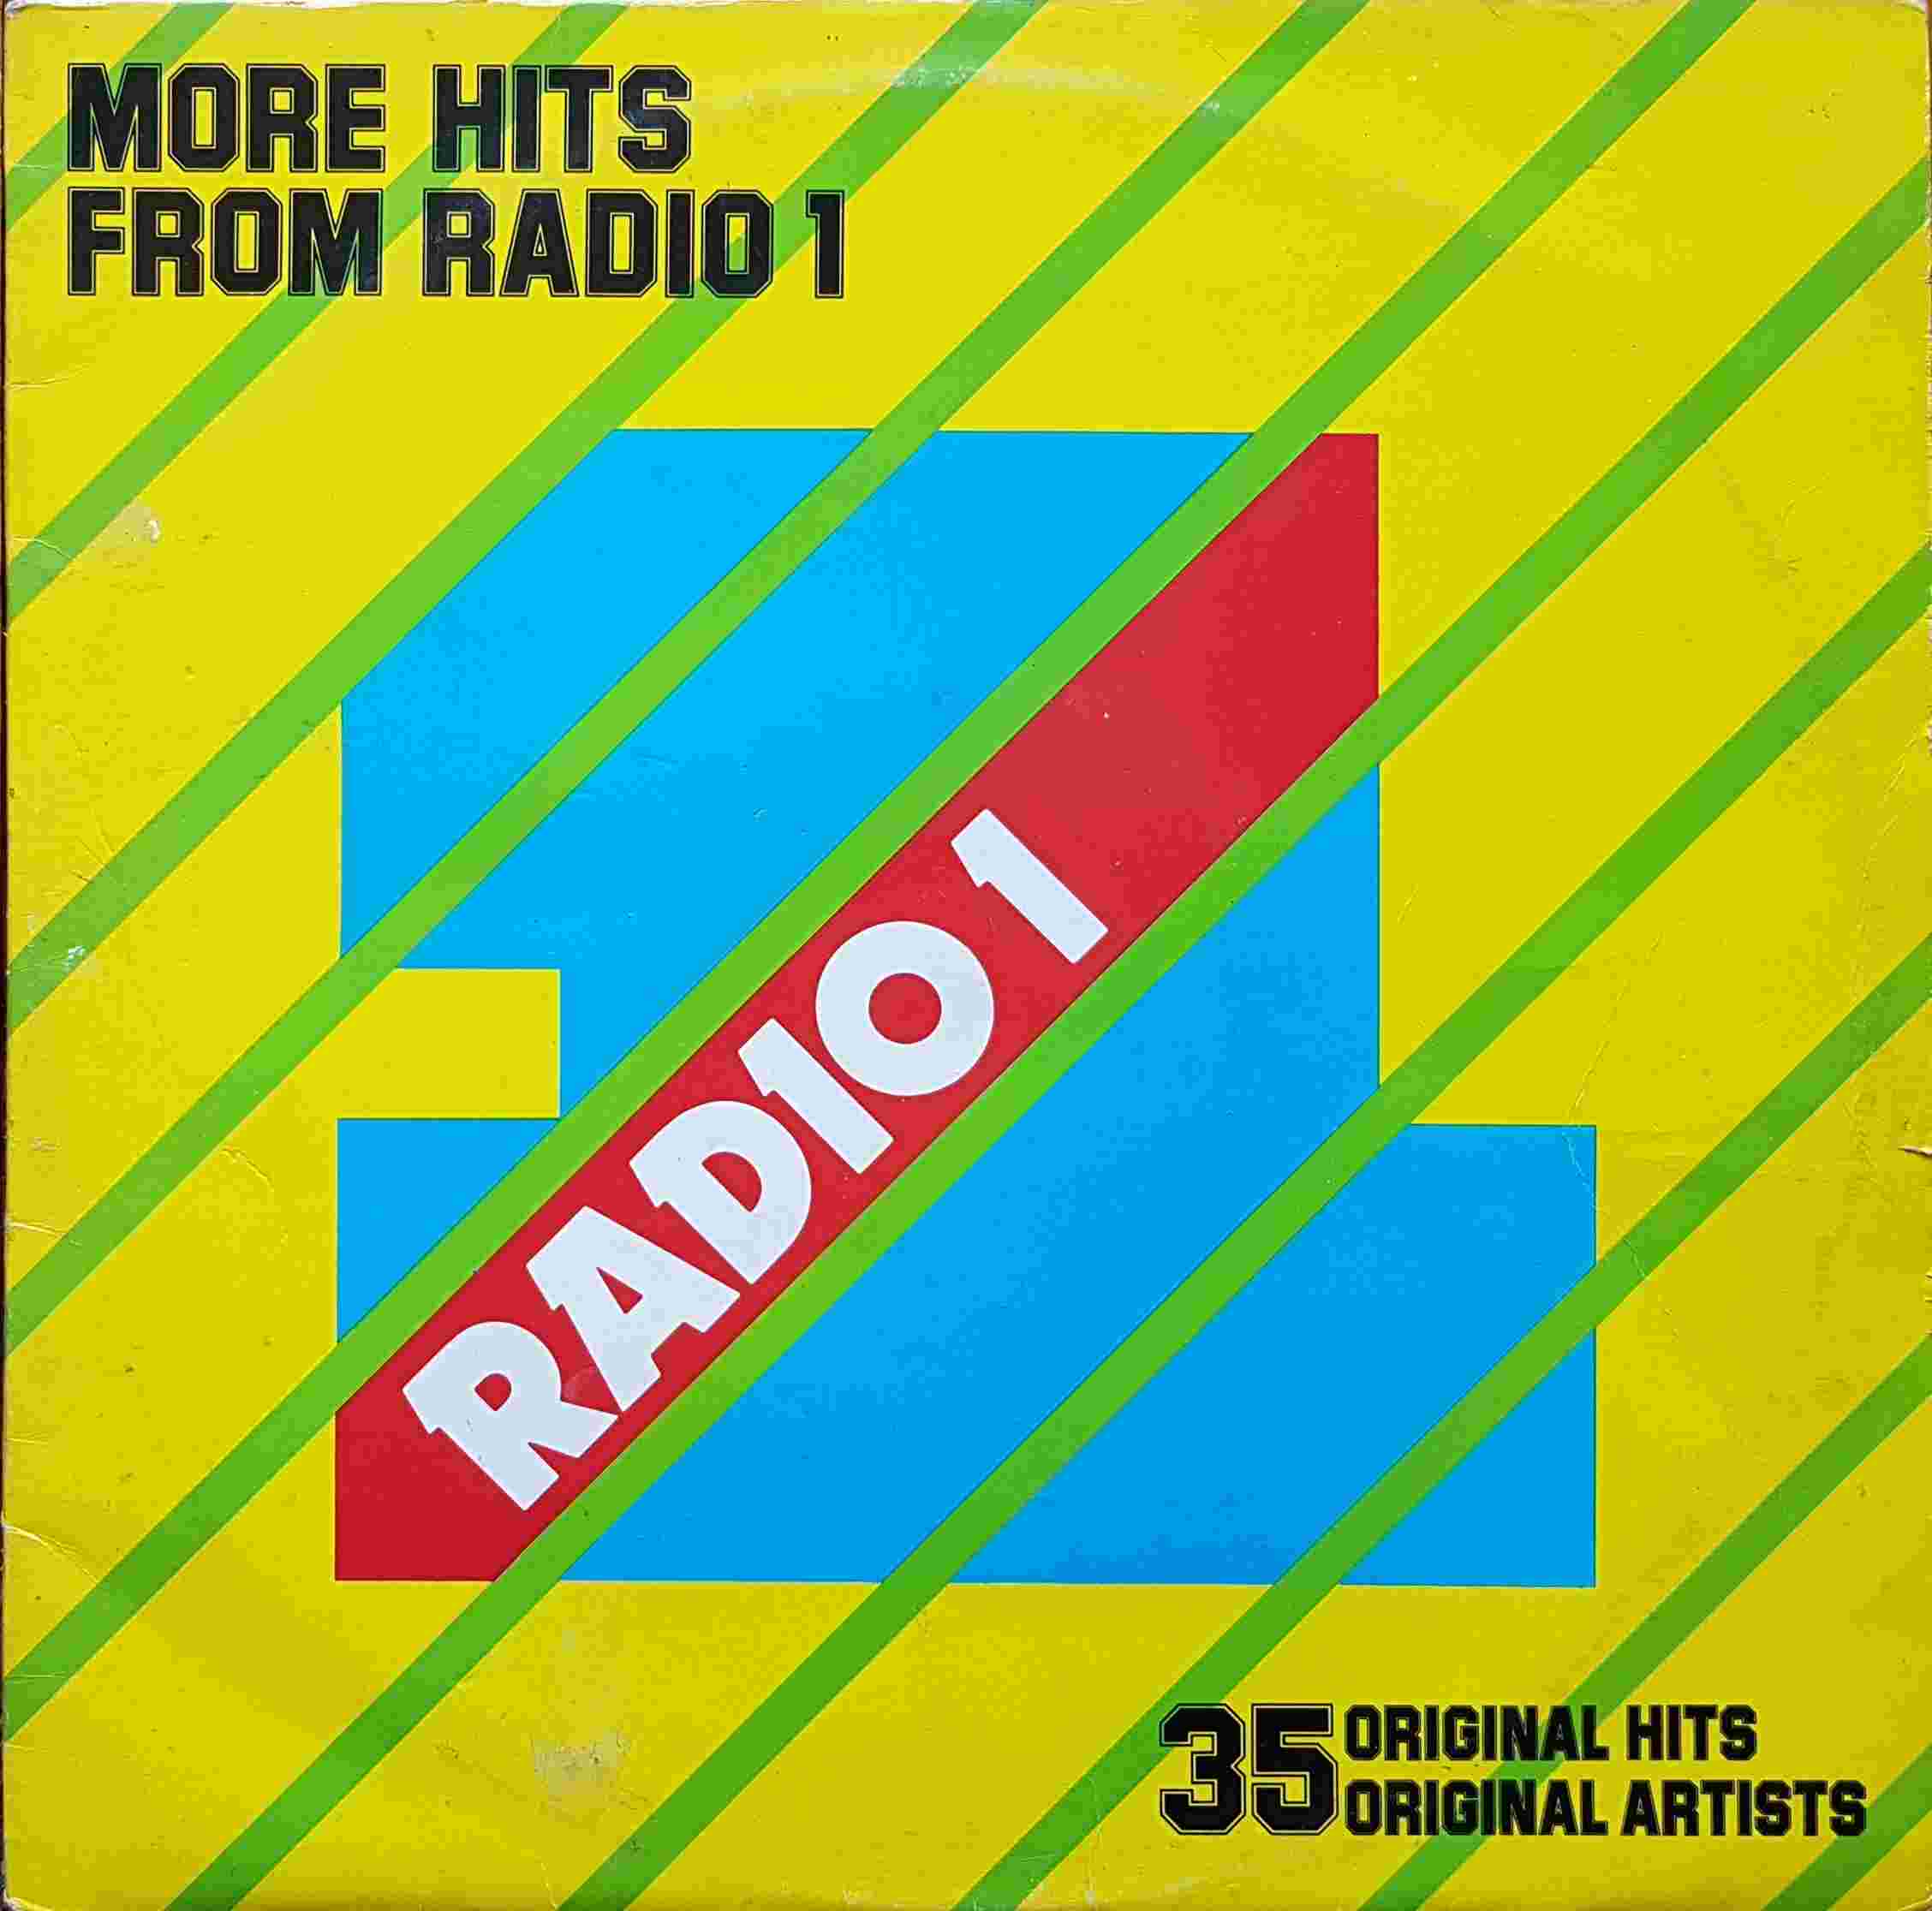 Picture of More hits from Radio 1 by artist Various from the BBC albums - Records and Tapes library